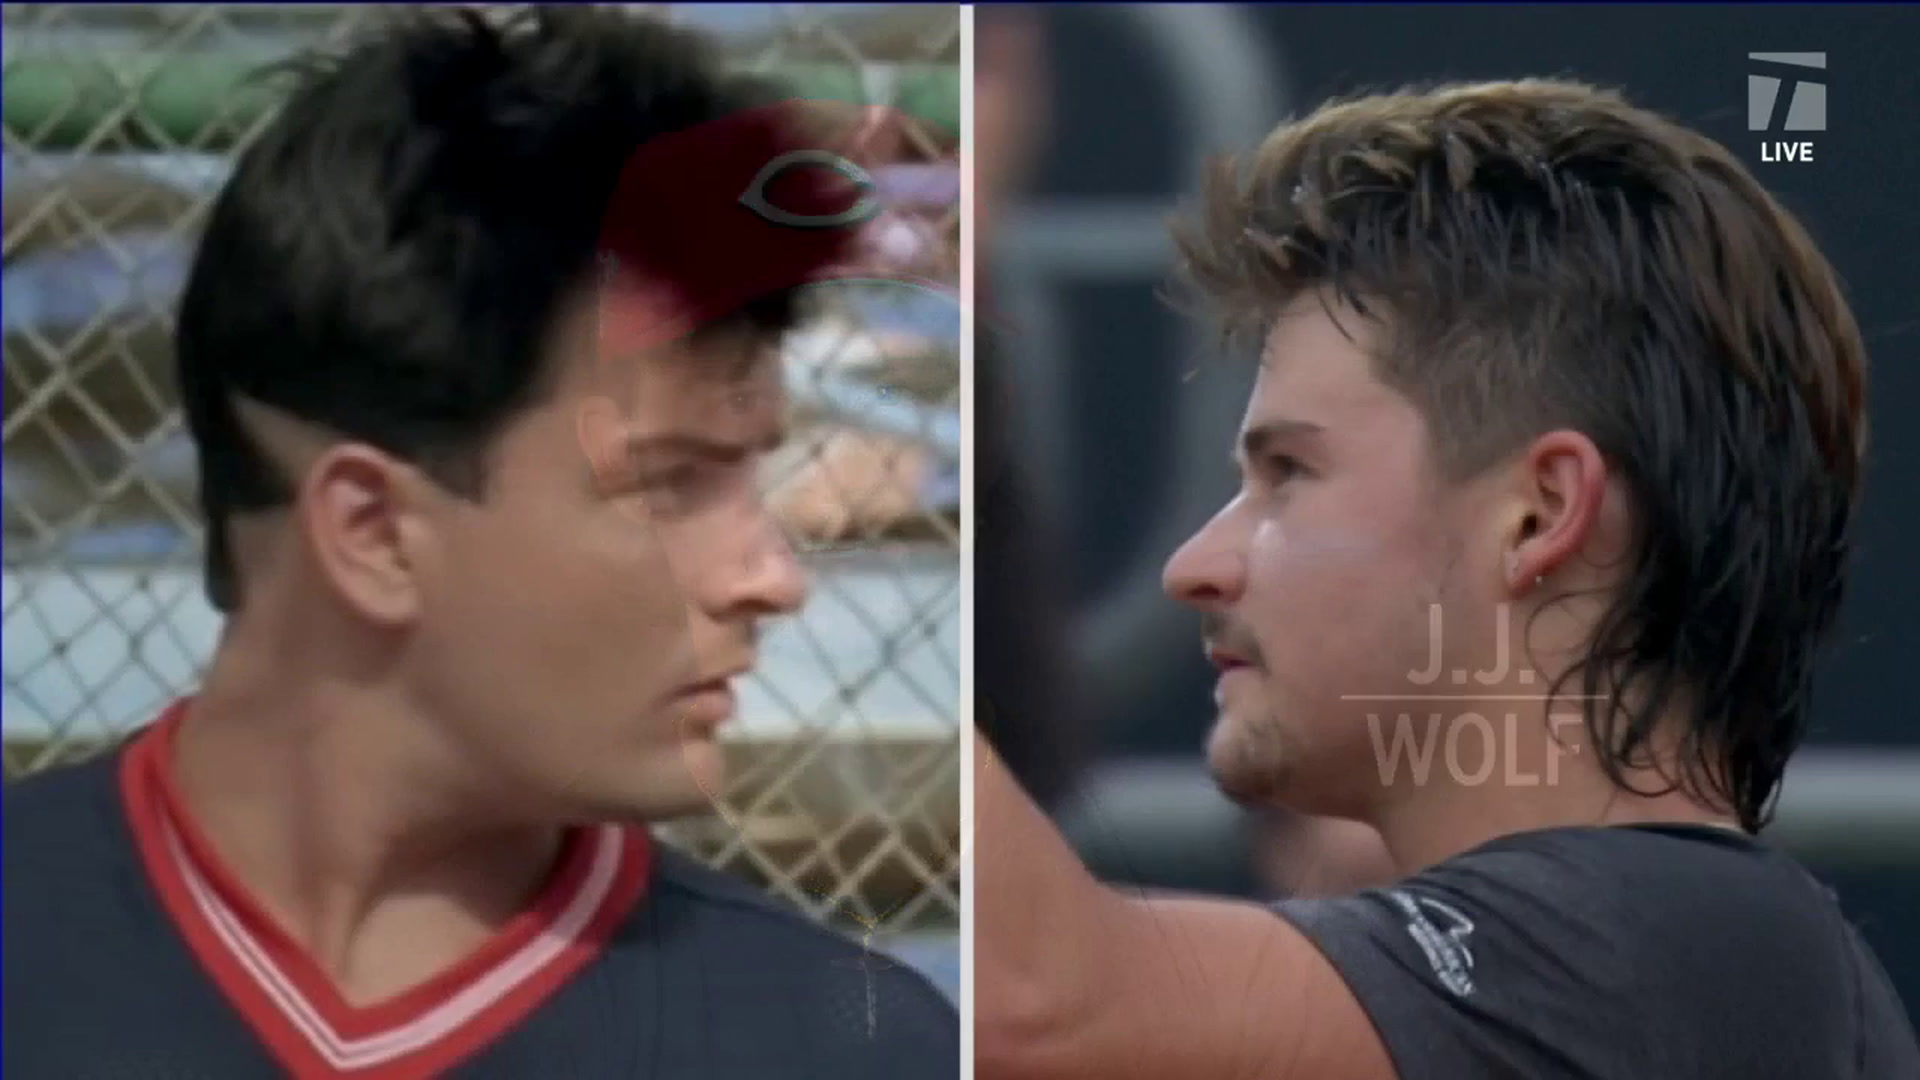 Roddick Compares JJ Wolf's Hair to Charlie Sheen's Ricky Vaughn, Tennis  Channel Live